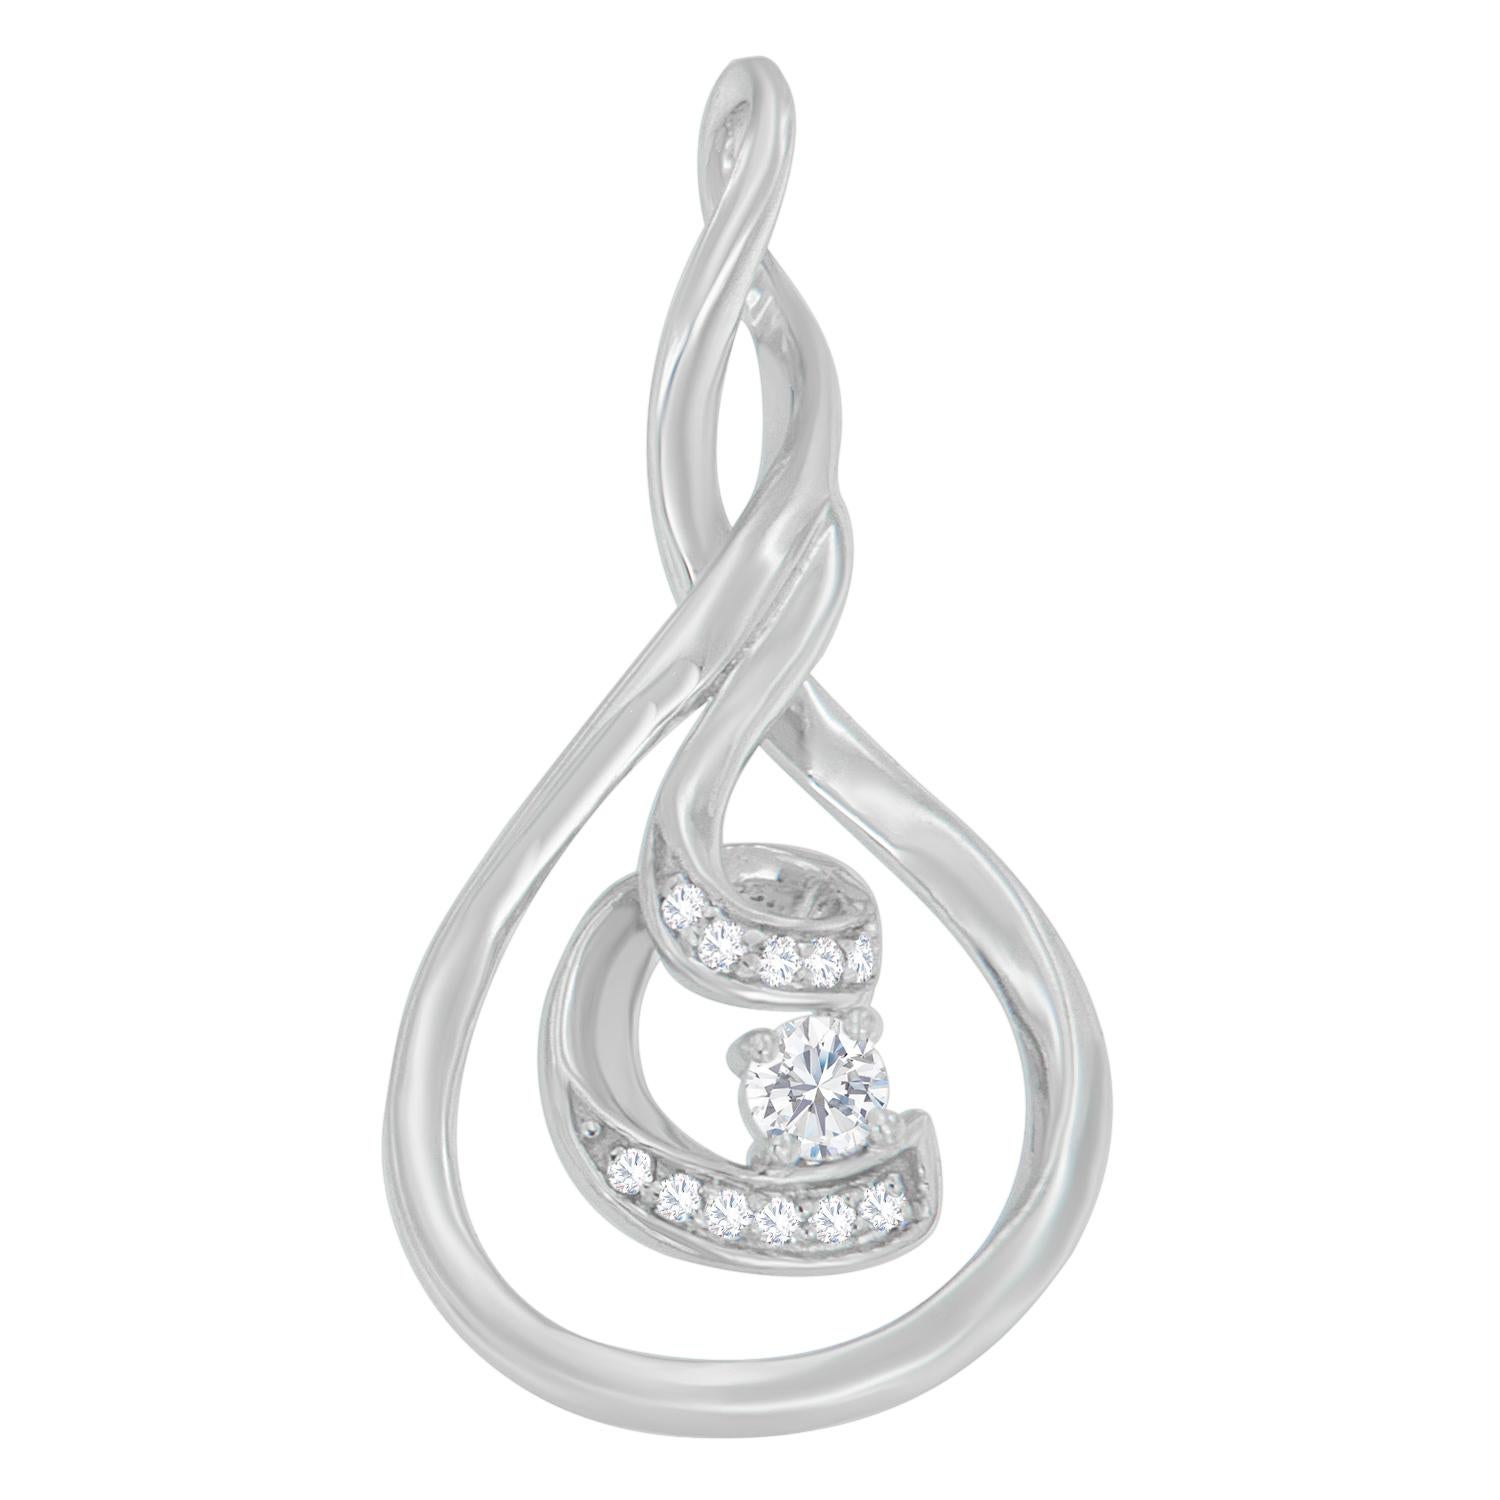 With a wide outer ring that beautifully surrounds the cascade of spirals inside, this exquisite white gold and diamond pendant is the perfect style to make her stand out from the crowd. This beautiful necklace includes 18” box chain with Spring Ring